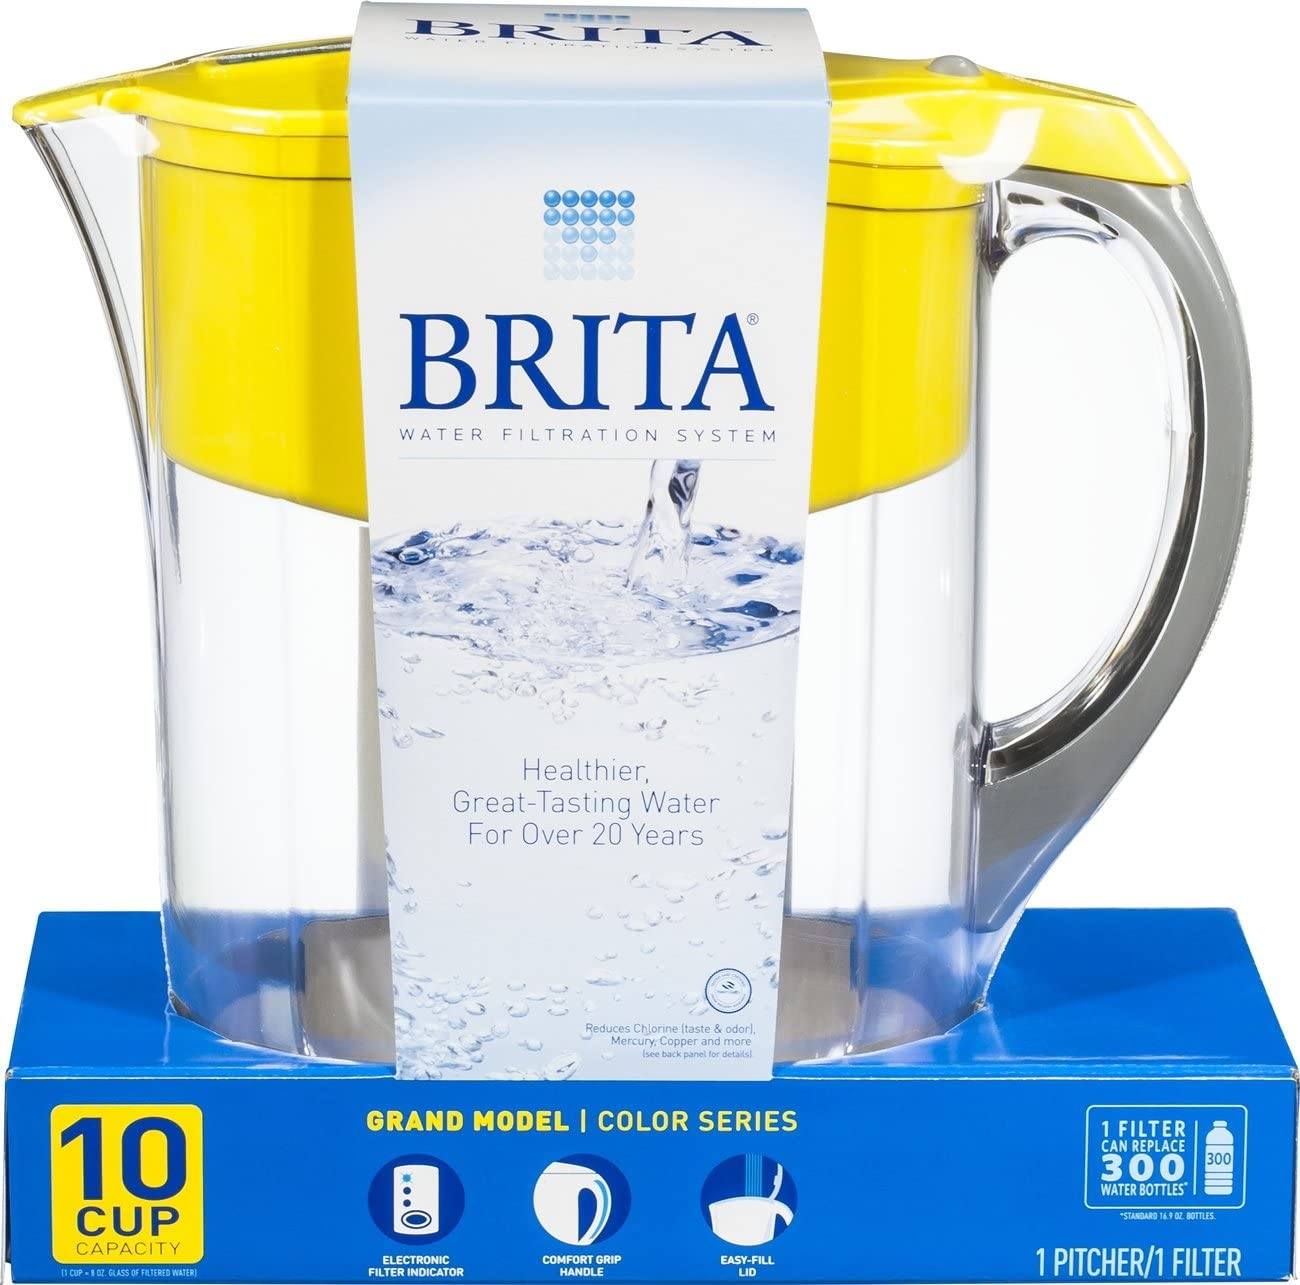 zerowater-vs-brita-which-water-filter-pitcher-is-better-house-grail